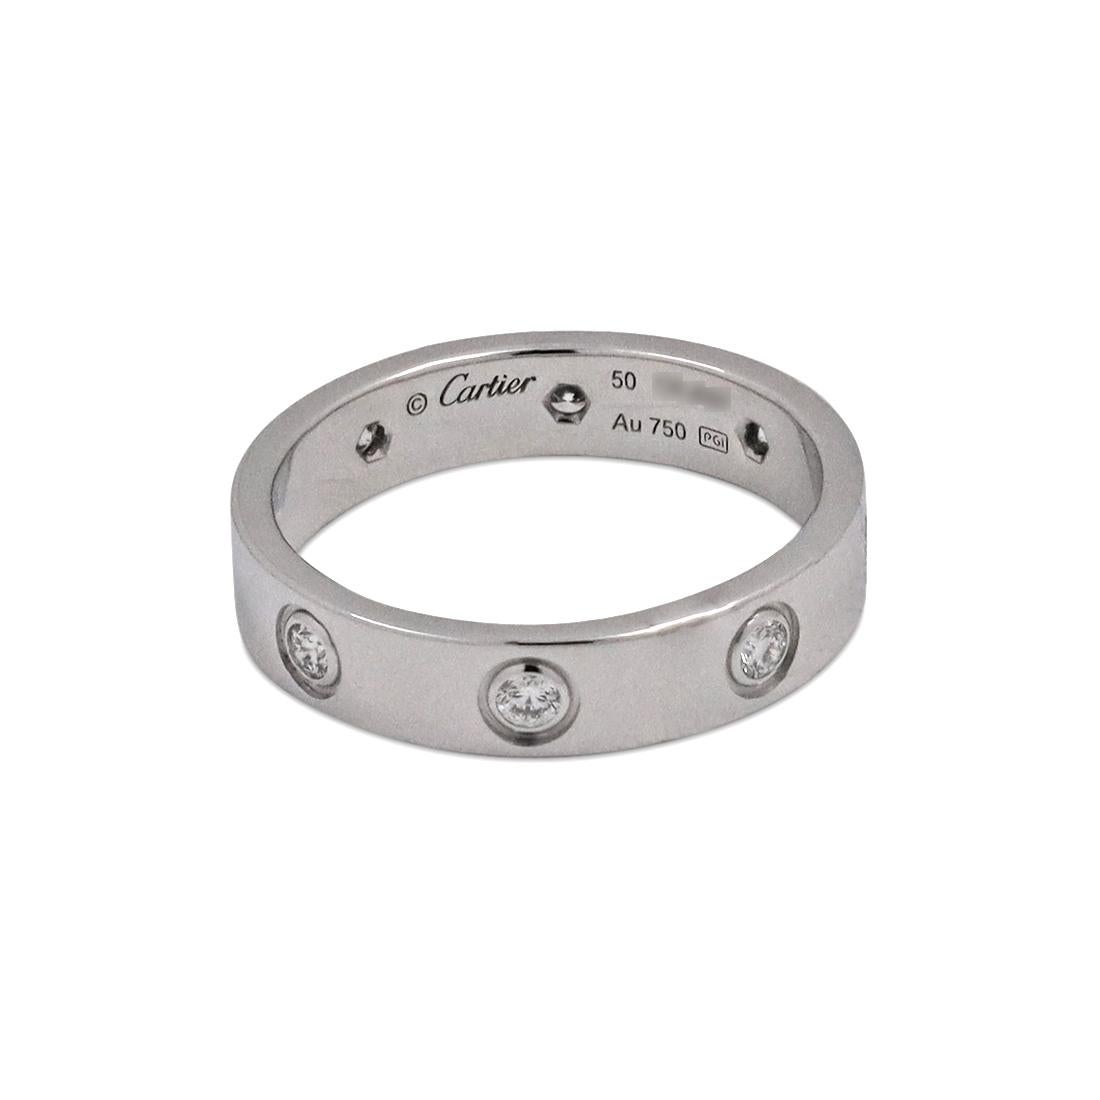 Authentic Cartier ‘Love’ wedding band crafted in 18 karat white gold and set with eight round brilliant cut diamonds (E-F, VS) weighing an estimated 0.19 carats total. Signed Cartier, 50, Au750, with serial number and hallmarks. Size 50 (5 1/4 US).